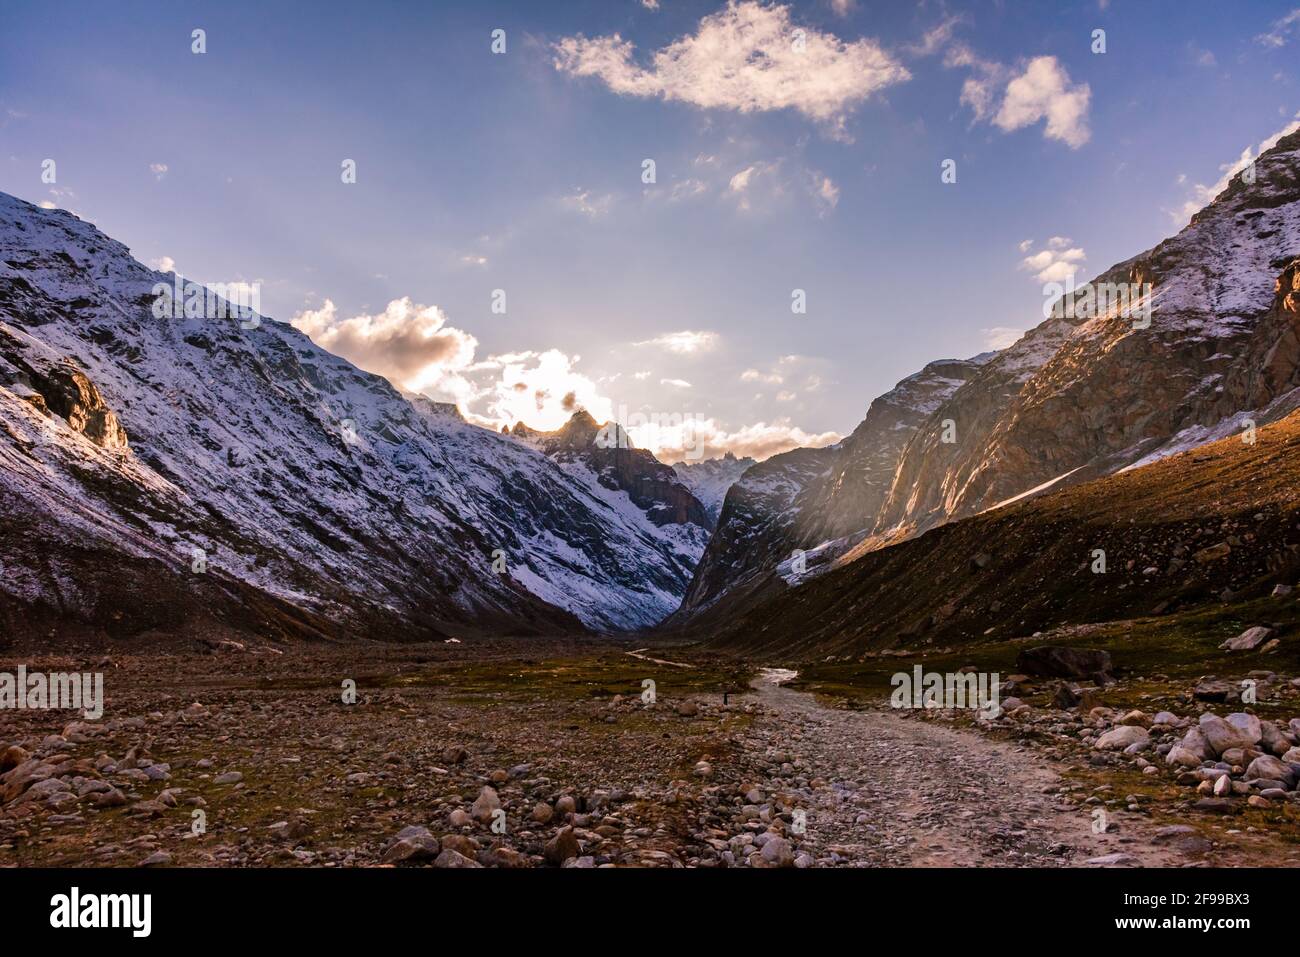 Serene Landscape of Chandra river valley & snow capped mountains during sunset near Rohtang Pass in Lahaul & Spiti district of Himachal Pradesh, India Stock Photo